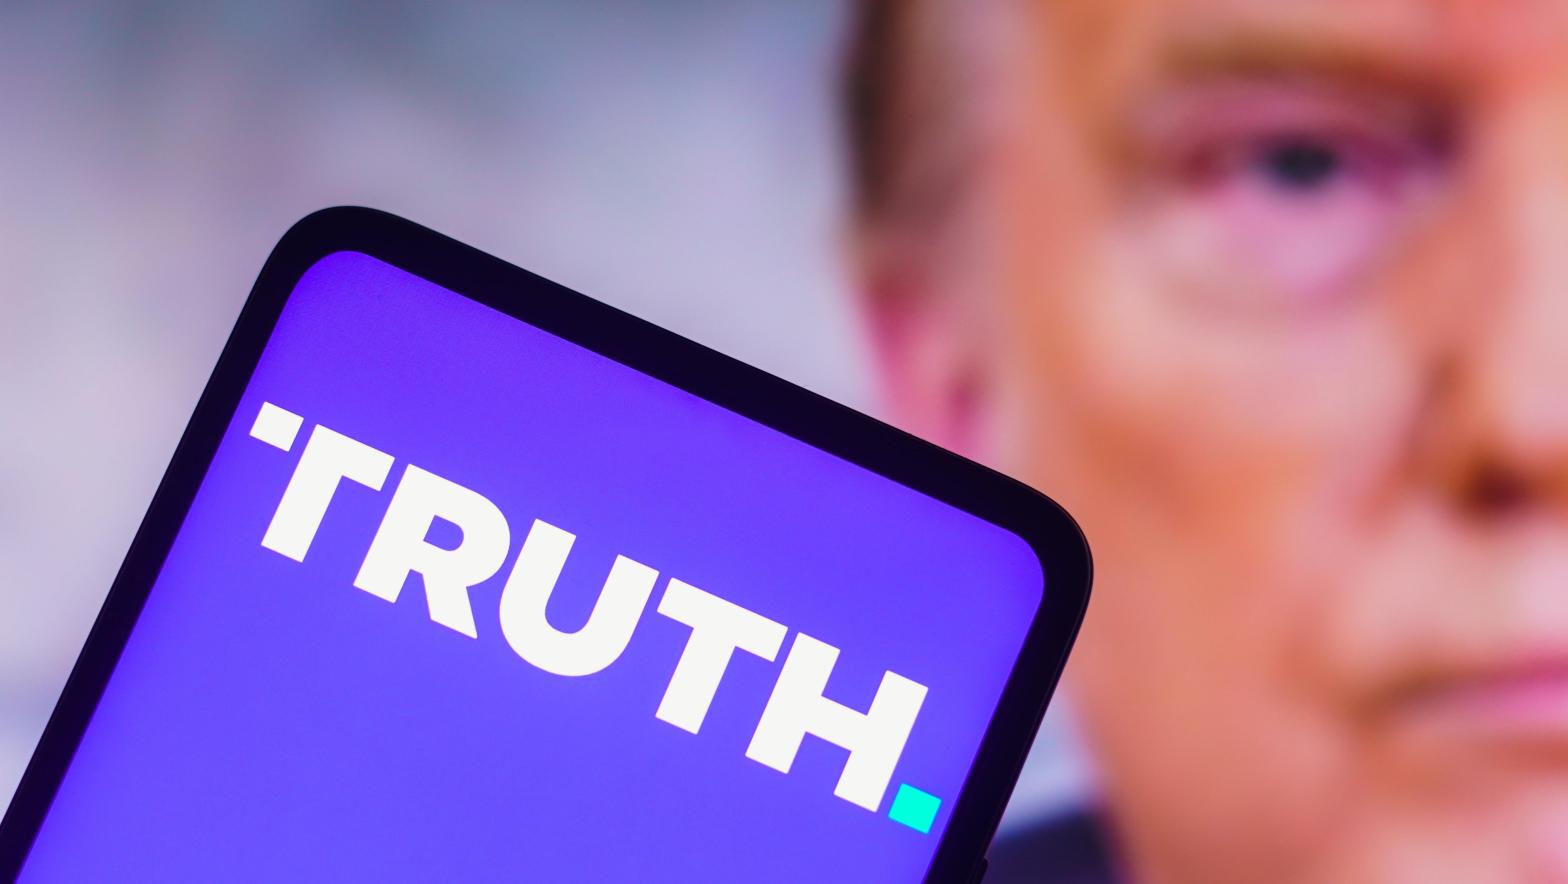 After all the projects Donald Trump has abandoned over the years, you would think the folks behind Truth Social would have seen this coming. (Image: rafapress, Shutterstock)